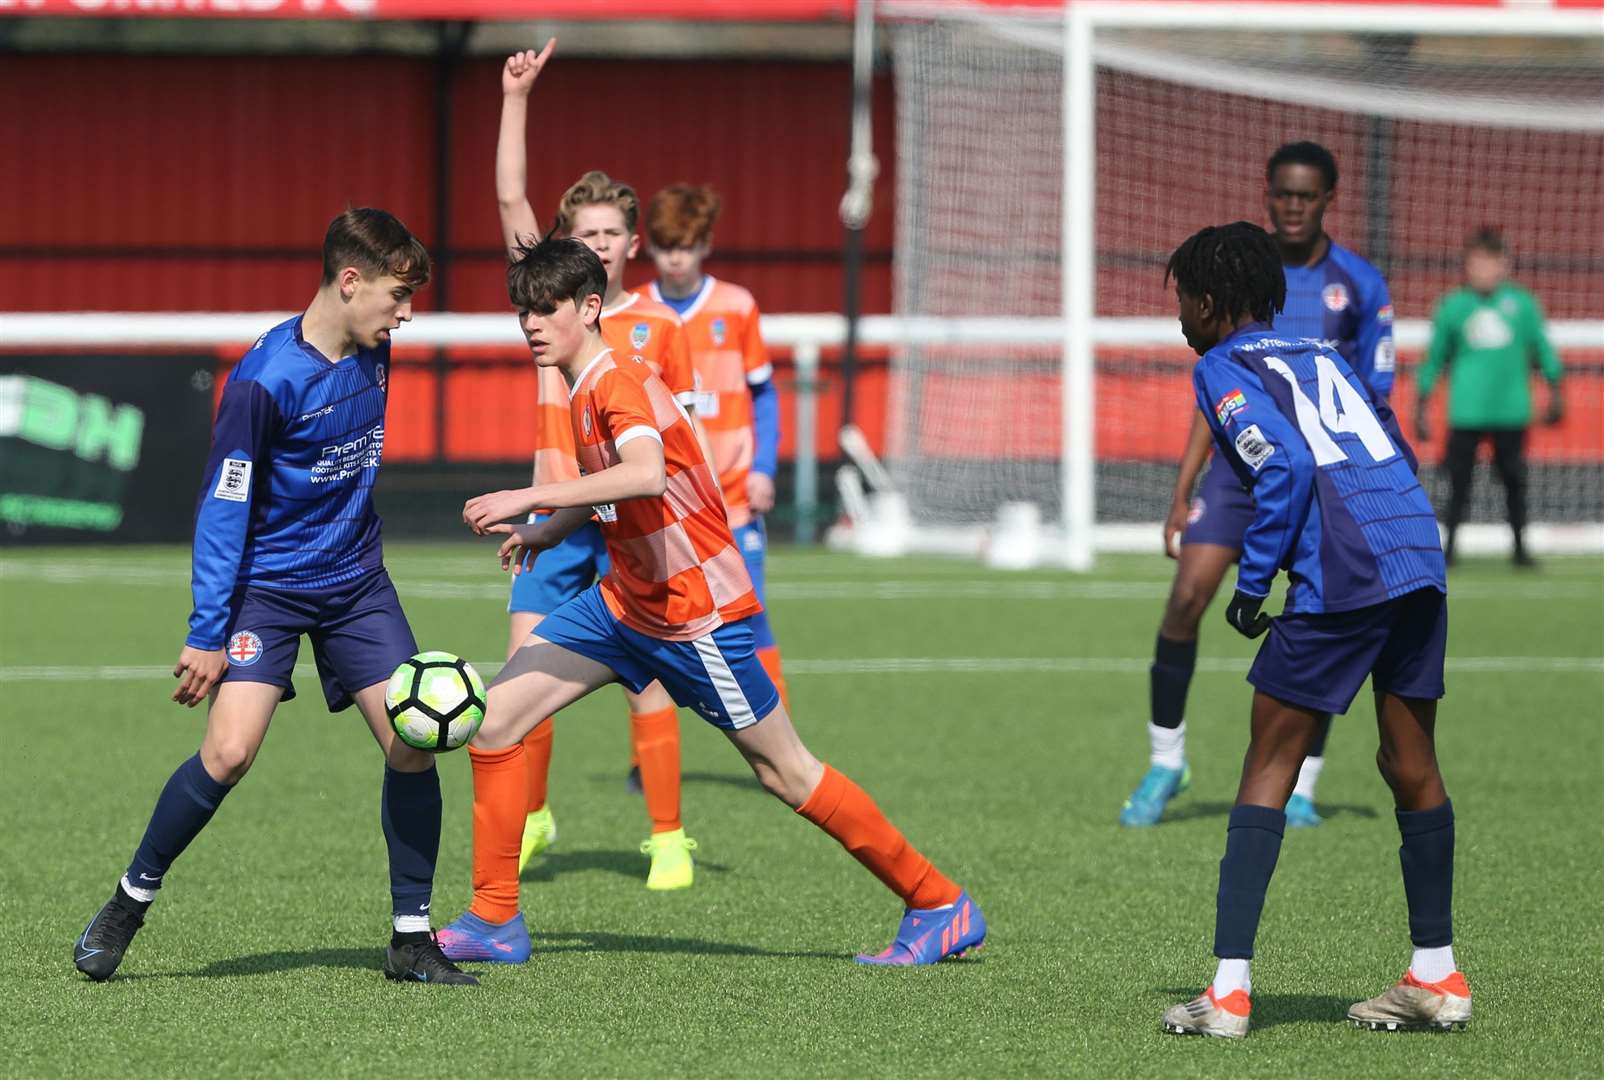 All the goals came in the first half between Cuxton 1991 Warriors under-14s (orange) and Danson Sports under-14s. Picture: PSP Images (55561660)